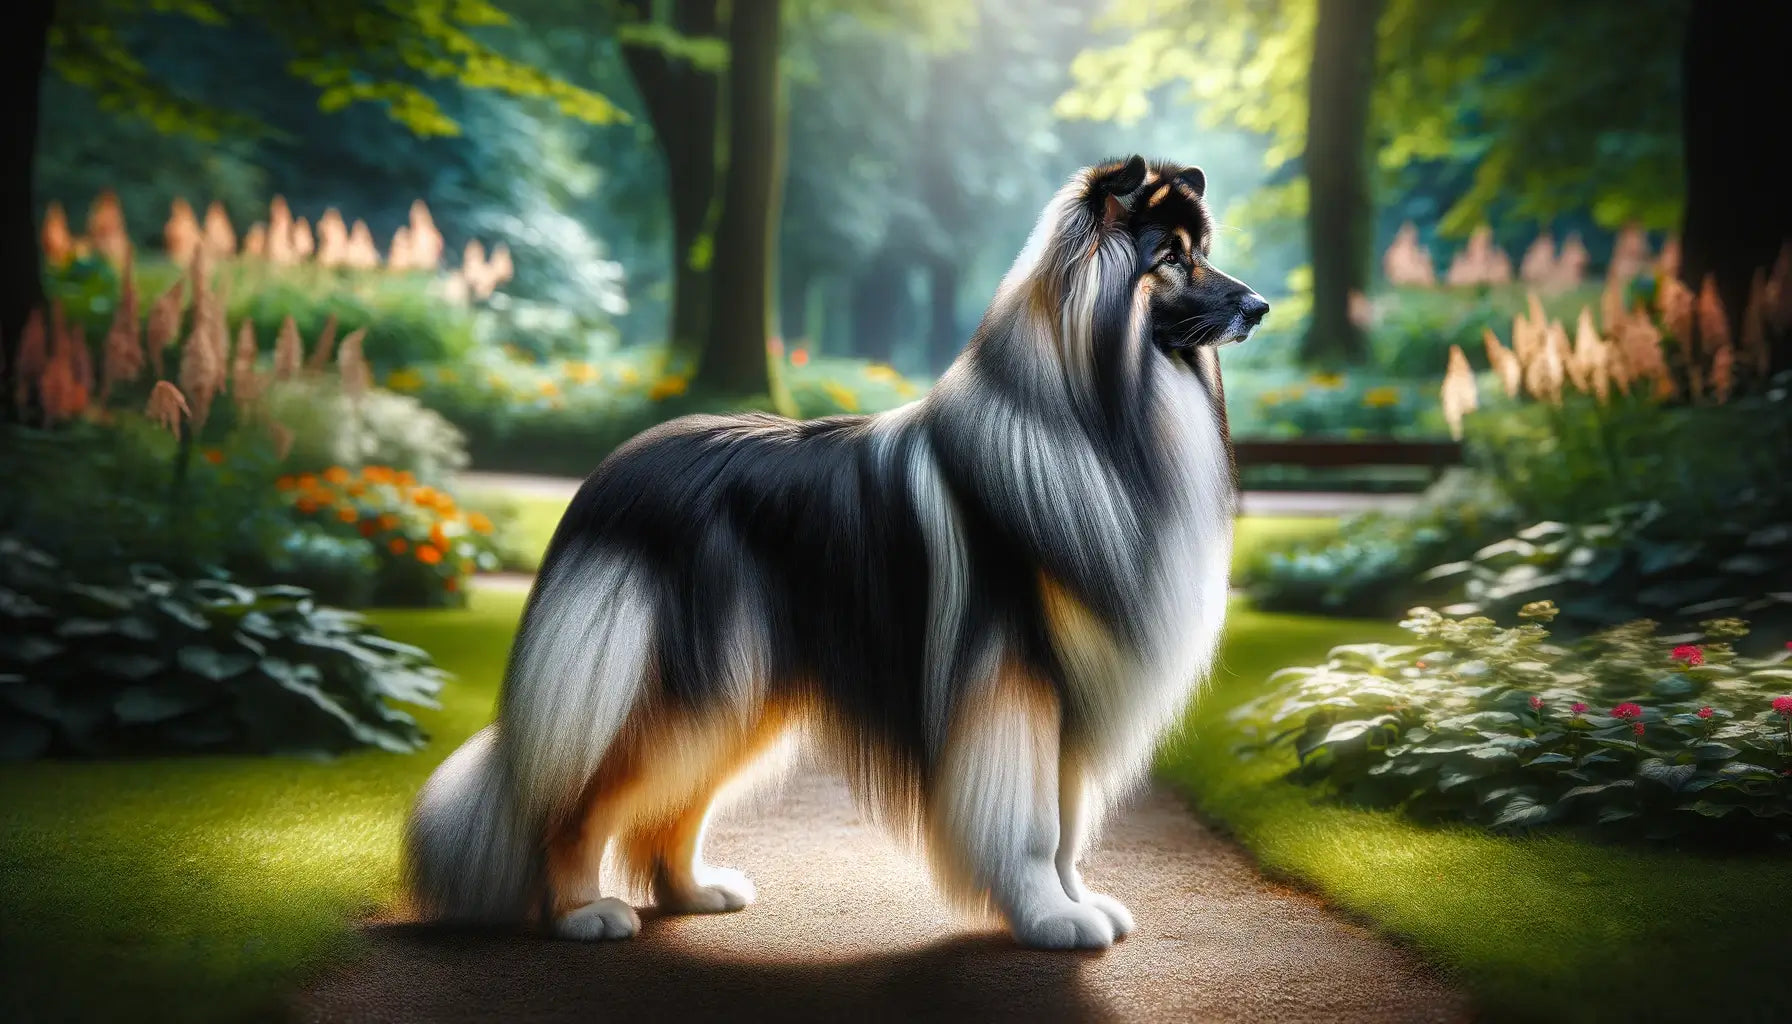 A Shiloh Shepherd in a lush park setting, illustrating the breed's long, flowing coat and balanced physique.